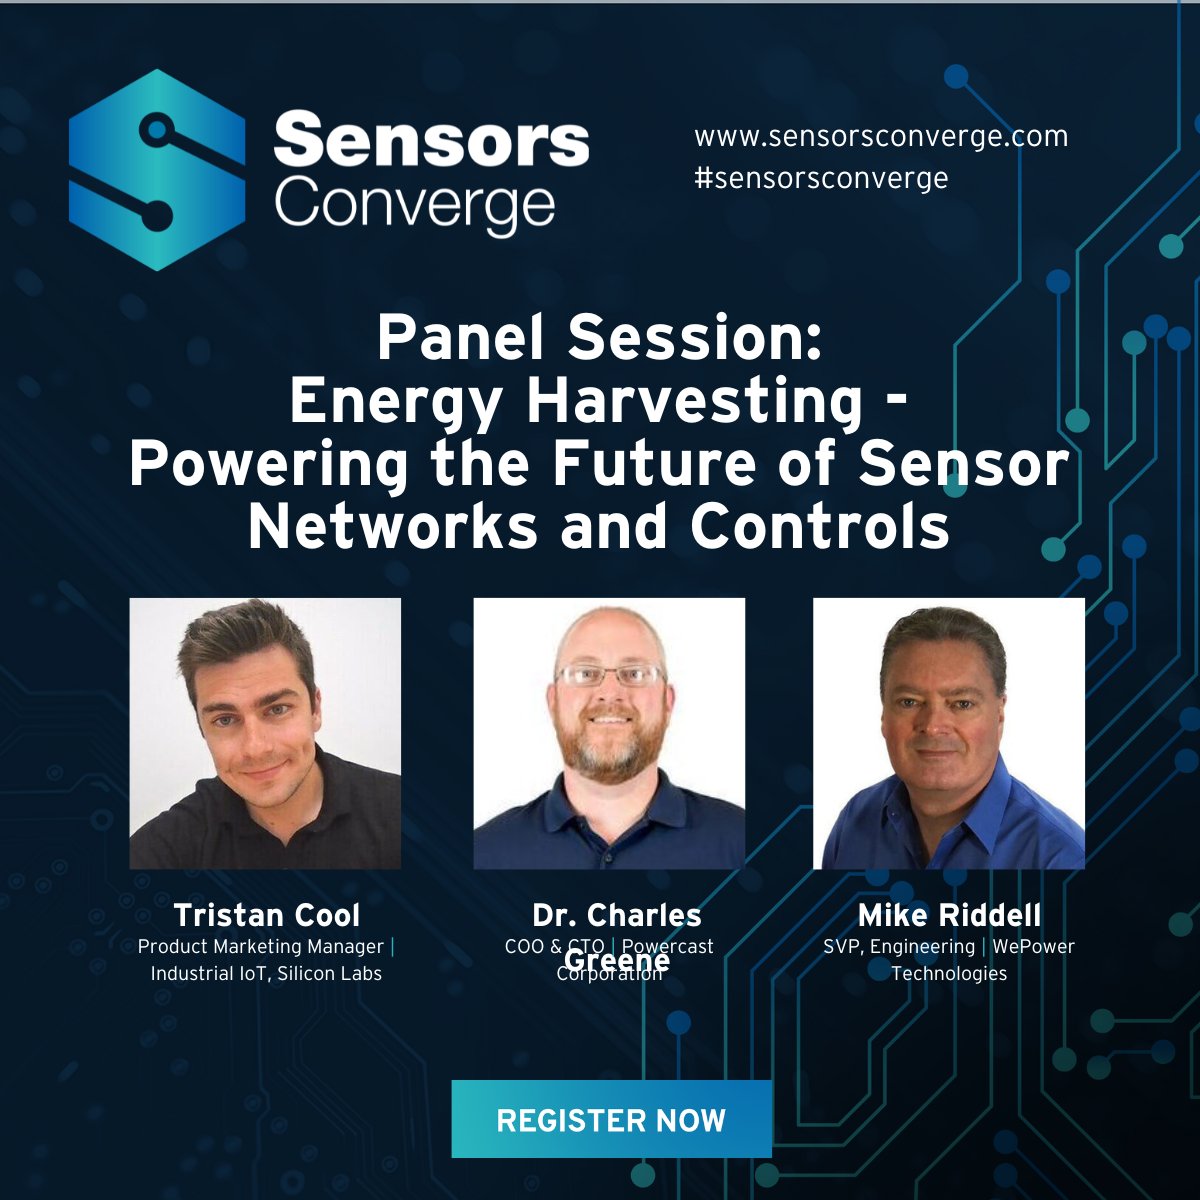 Join Tristan Cool, Dr. Charles Greene, and Mike Riddell at the #SensorsConverge Panel Session: Energy Harvesting - Powering the Future of Sensor Networks and Controls. View the schedule: lnkd.in/gQbi_fcD Register now! Join us this June 24-26 in Santa Clara, CA! #sensors